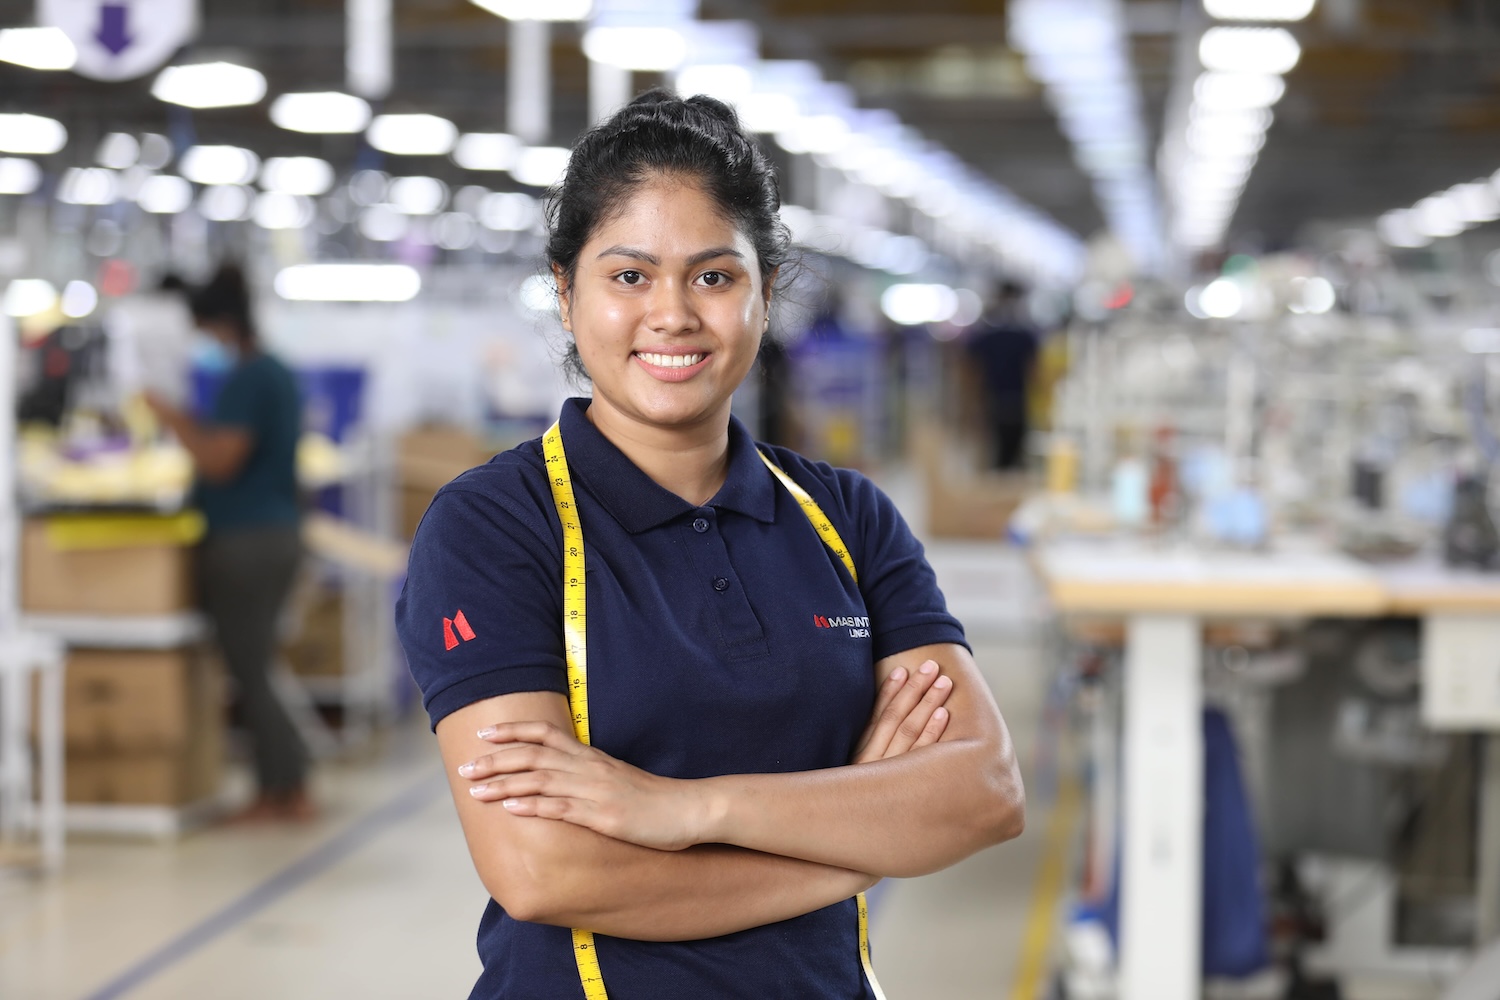 MAS Holdings has set ambitious goals, including empowering 100% of women on the factory floors through education and opportunities, combatting gender-based violence, and achieving 30% women in management by 2025.